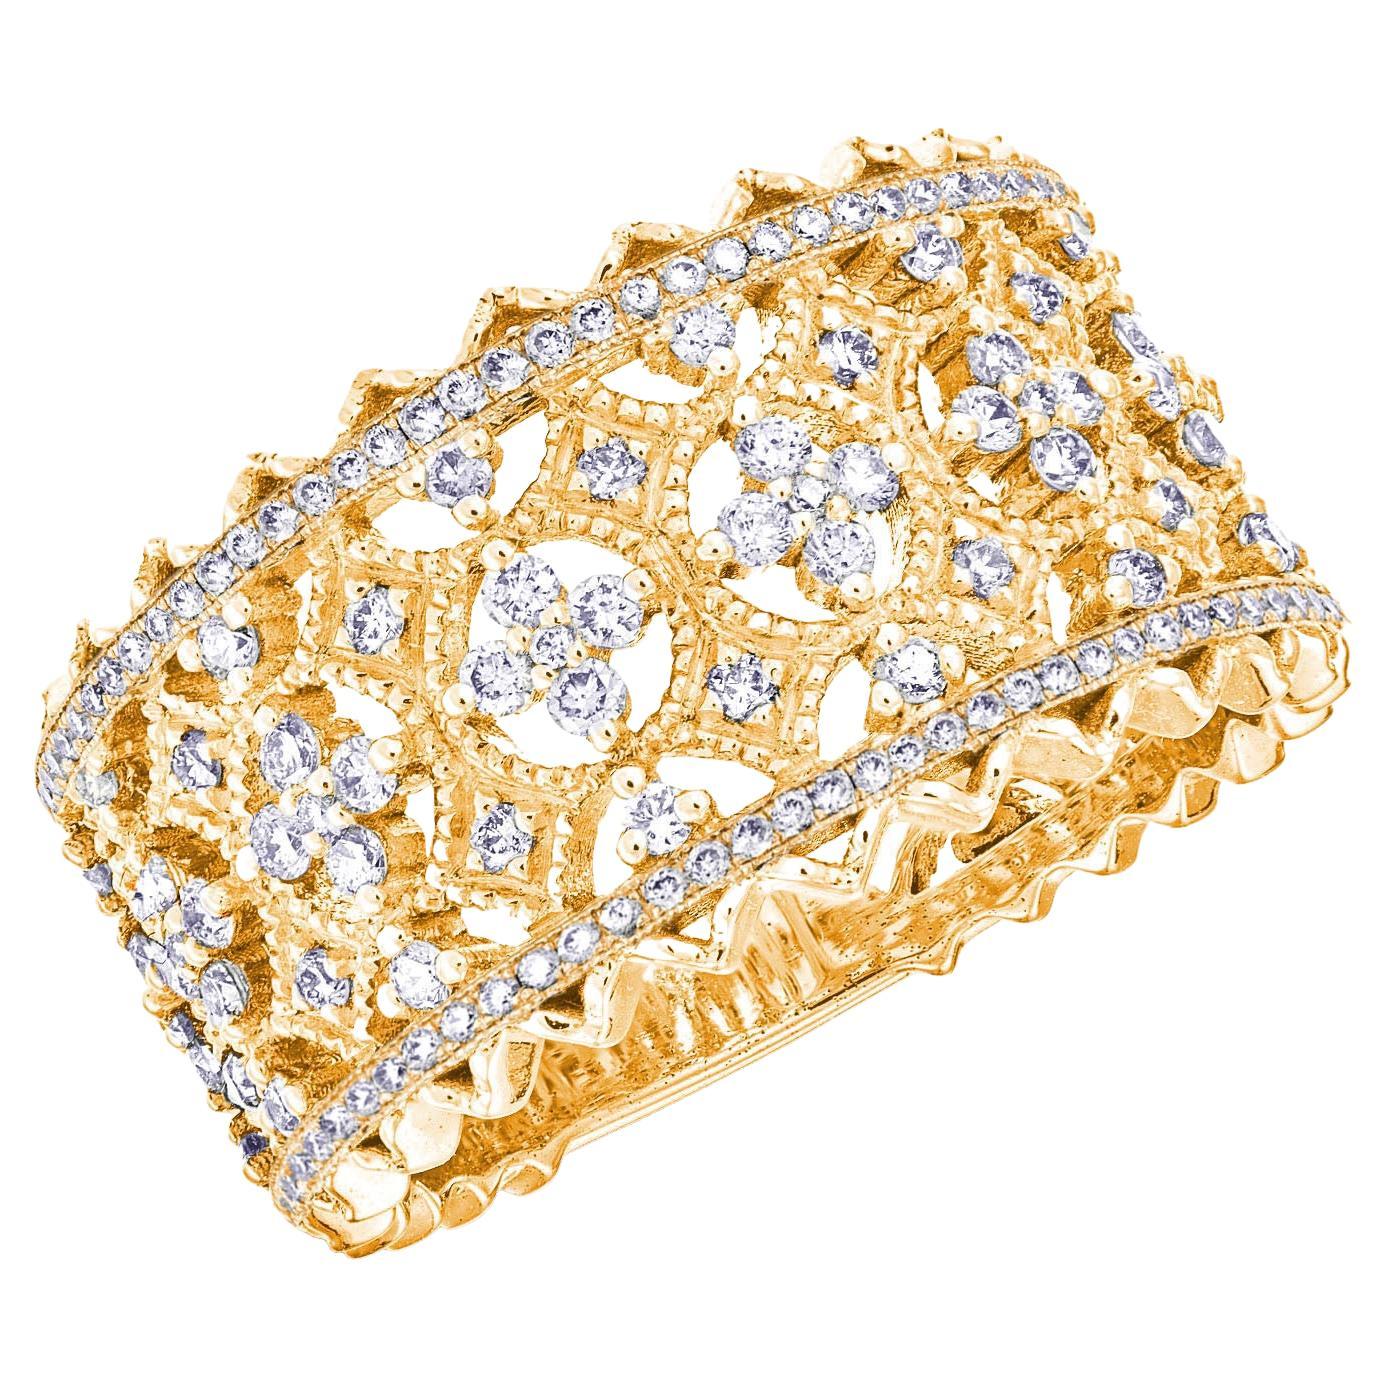 For Sale:  18k Yellow Gold Lace Band Ring With 1.10 Carats Of Diamonds Milgrain Setting